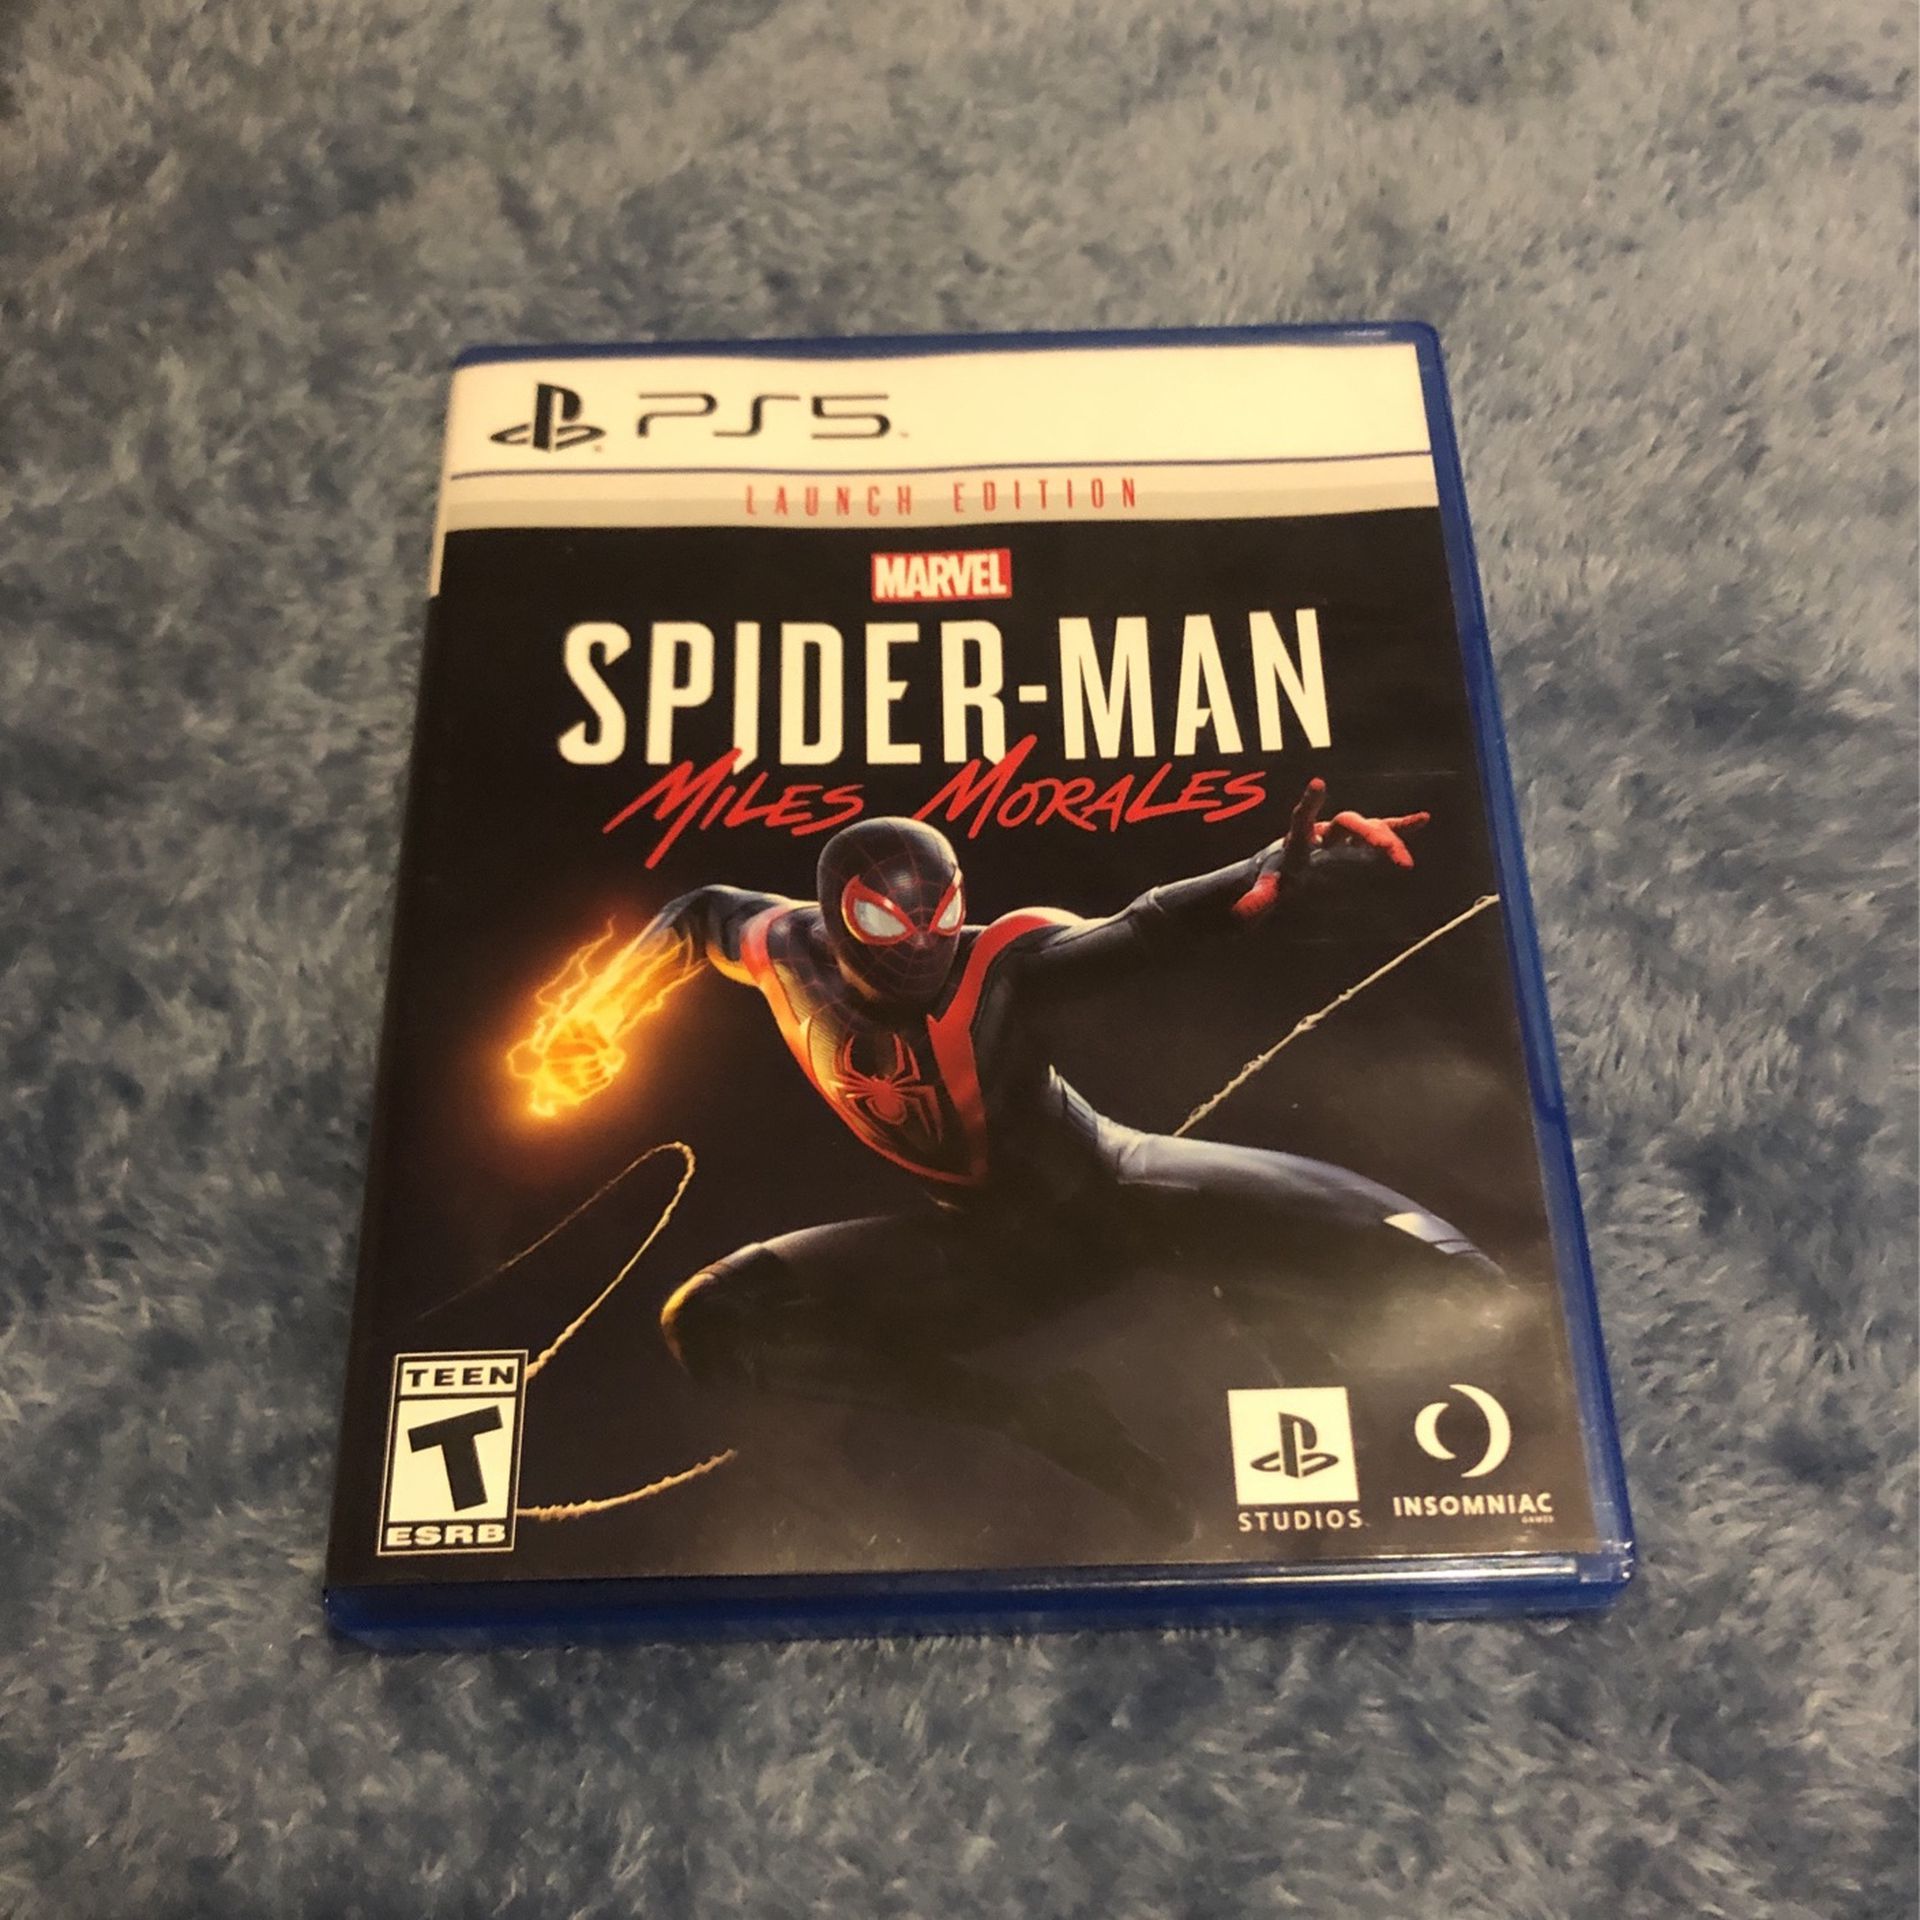 Spider-Man Miles Morales (PS5) - Launch Edition